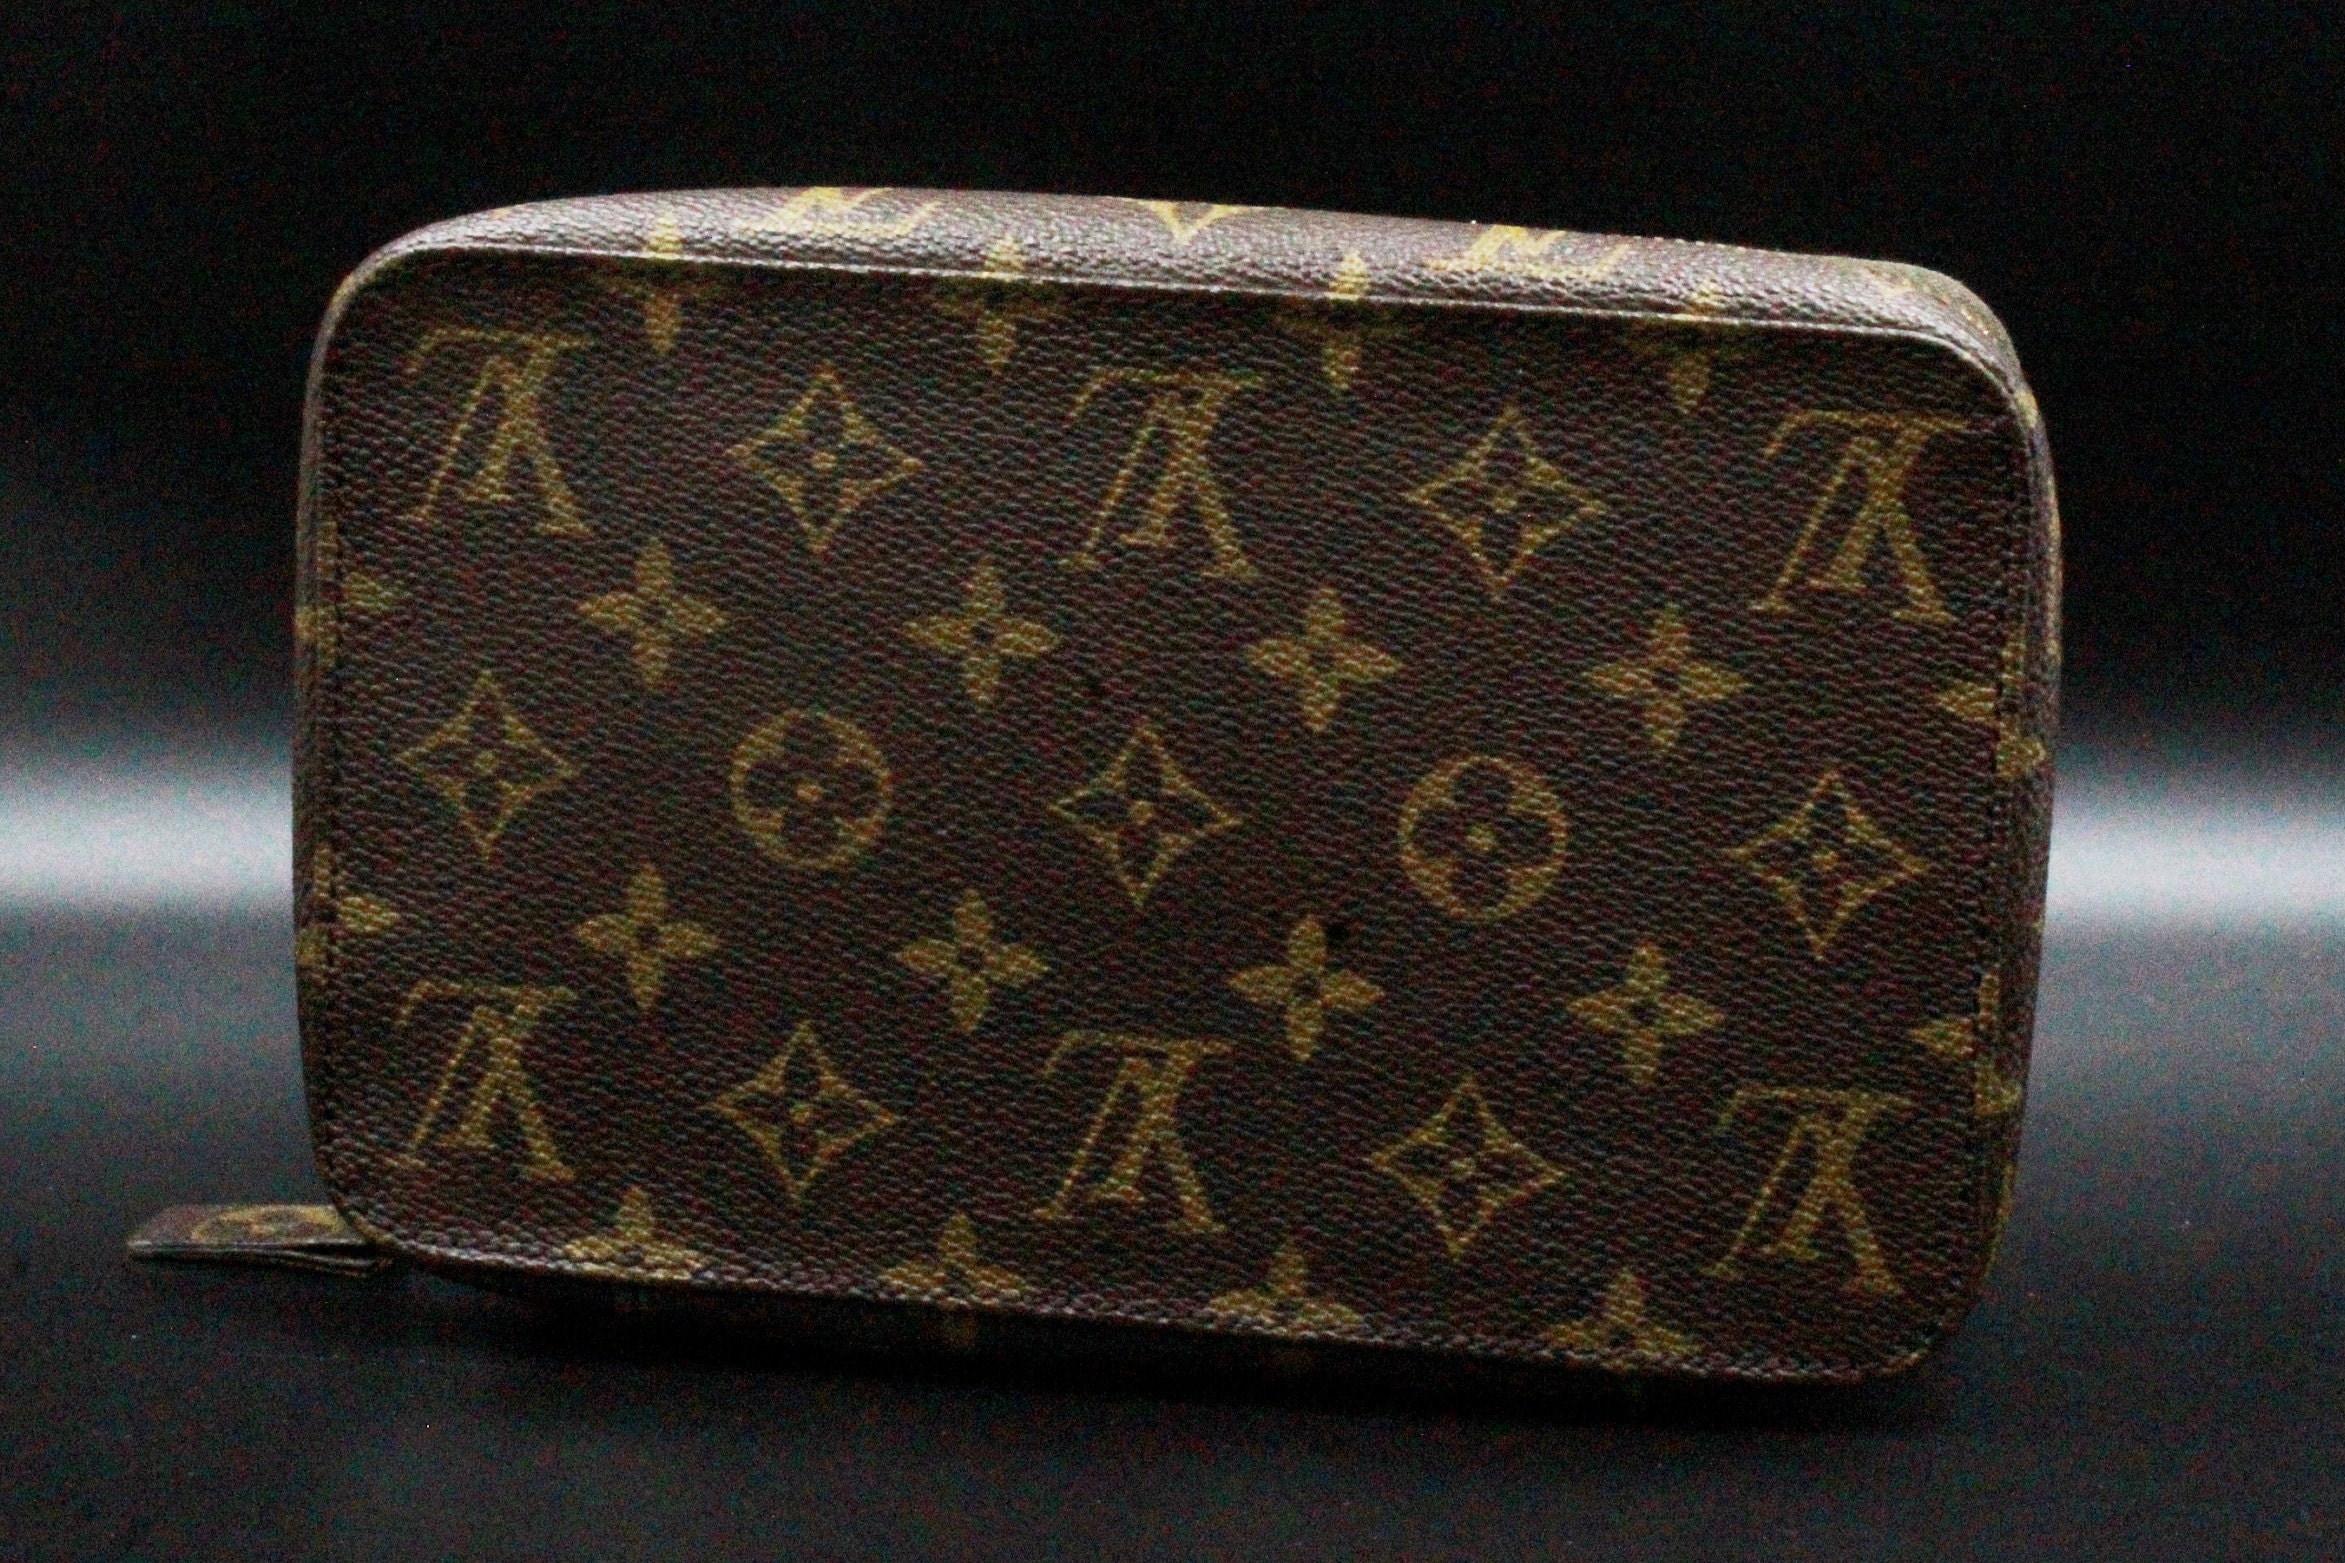 Louis Vuitton Inspired Jewelry Accessory Box Hand Painted Monogram Print in  the Classic LV Colors Stained Sol…